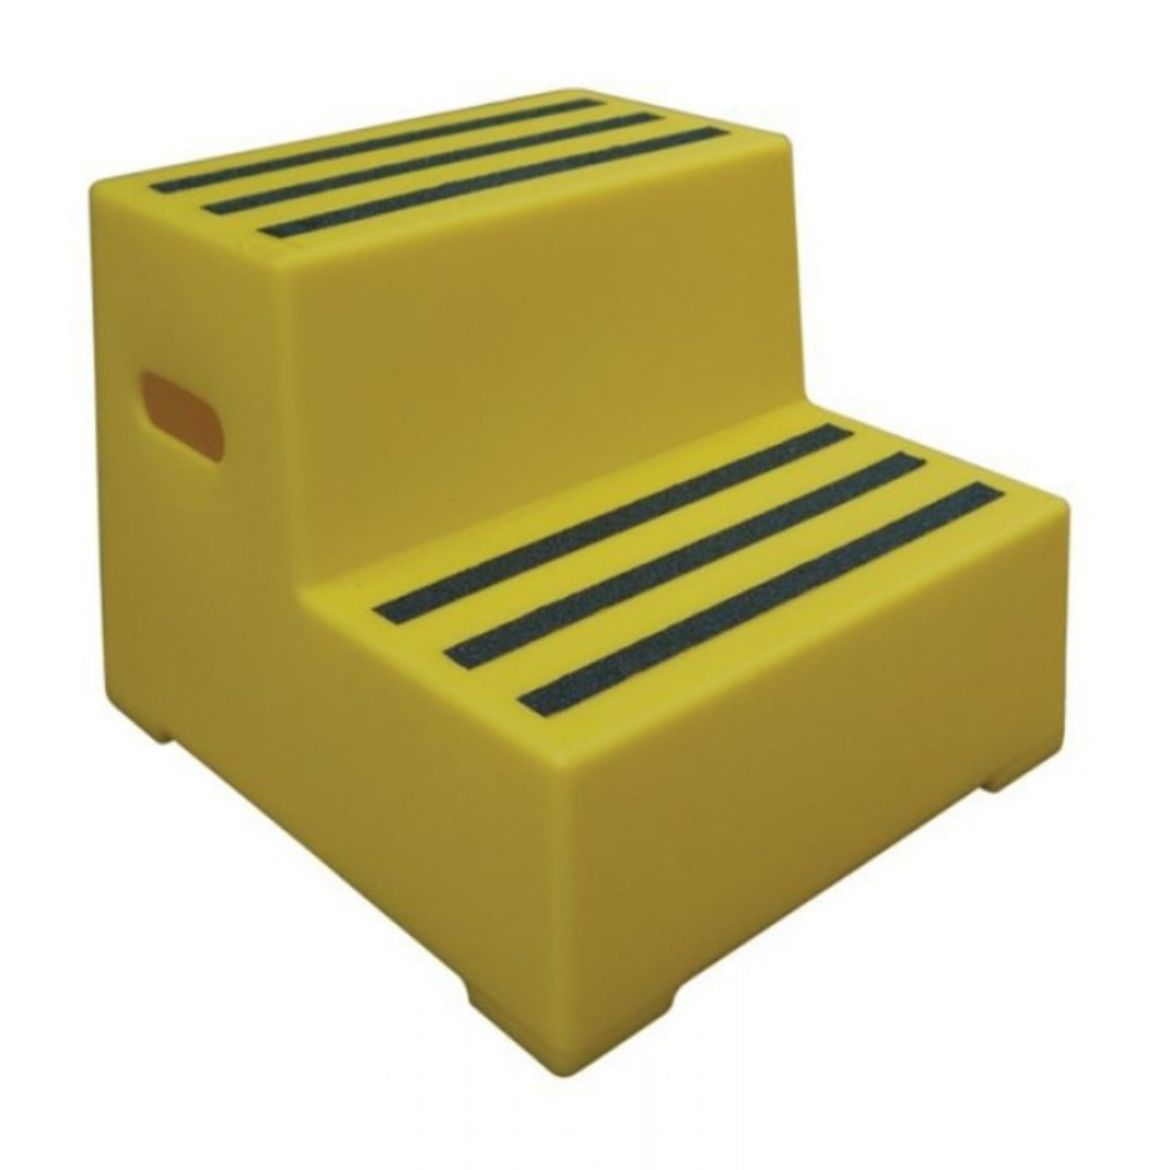 Picture of EXCELSIOR SAFETY STAIRS 2 STEP 260KG YELLOW